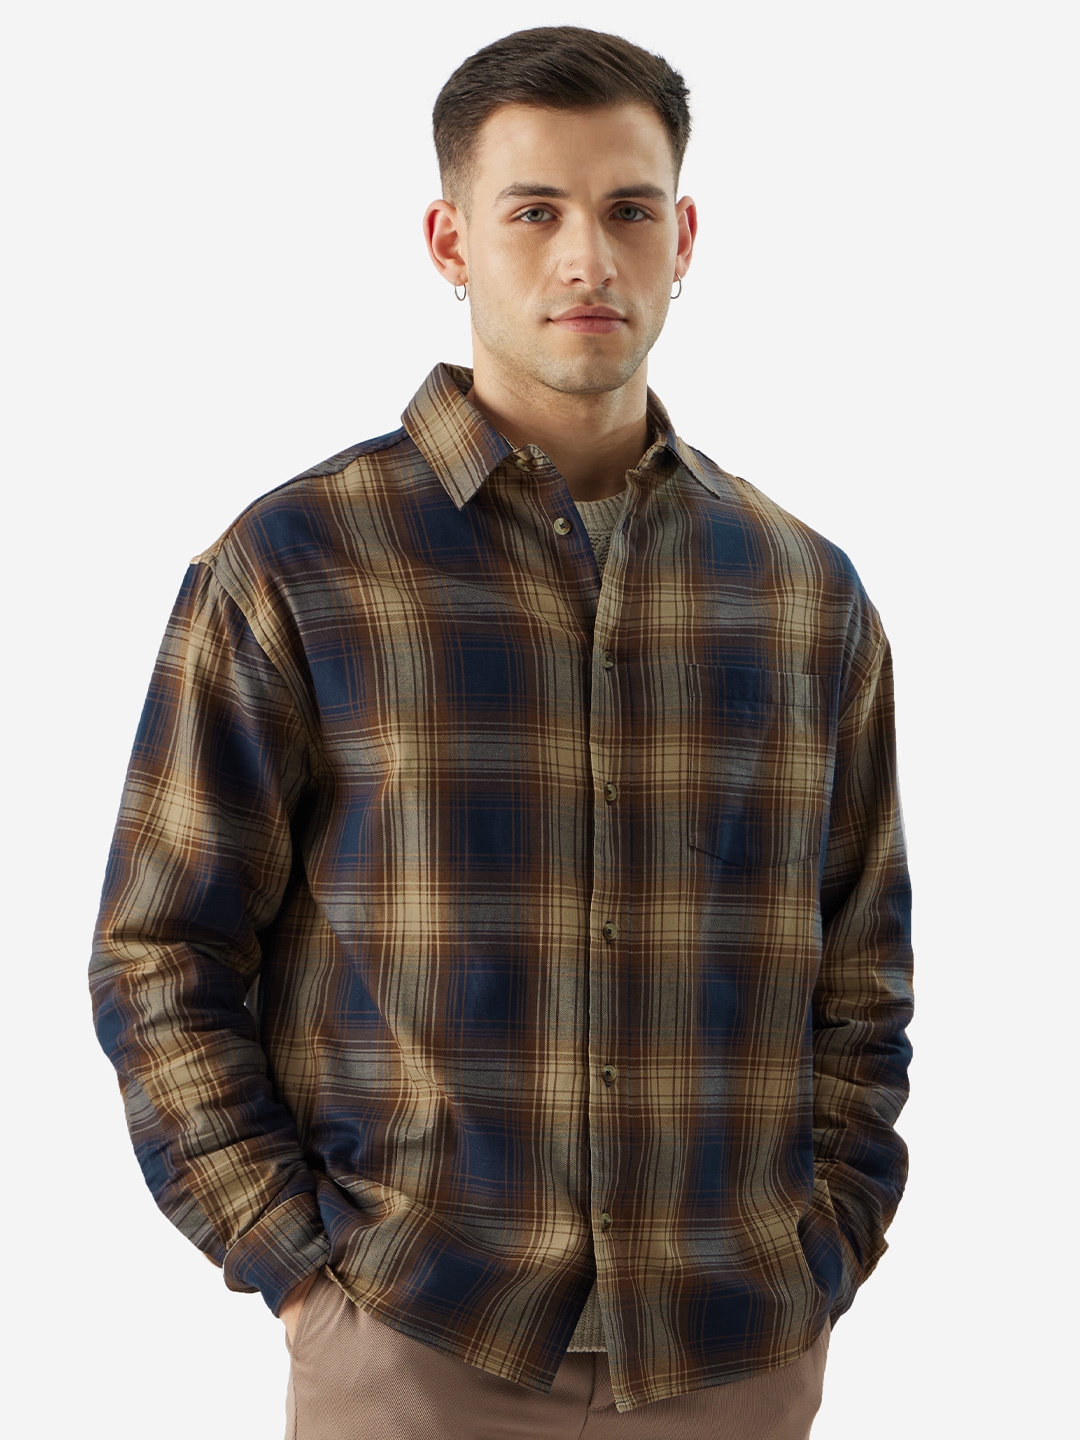 The Souled Store | Men's Plaid: Brown & White Men's Relaxed Shirts